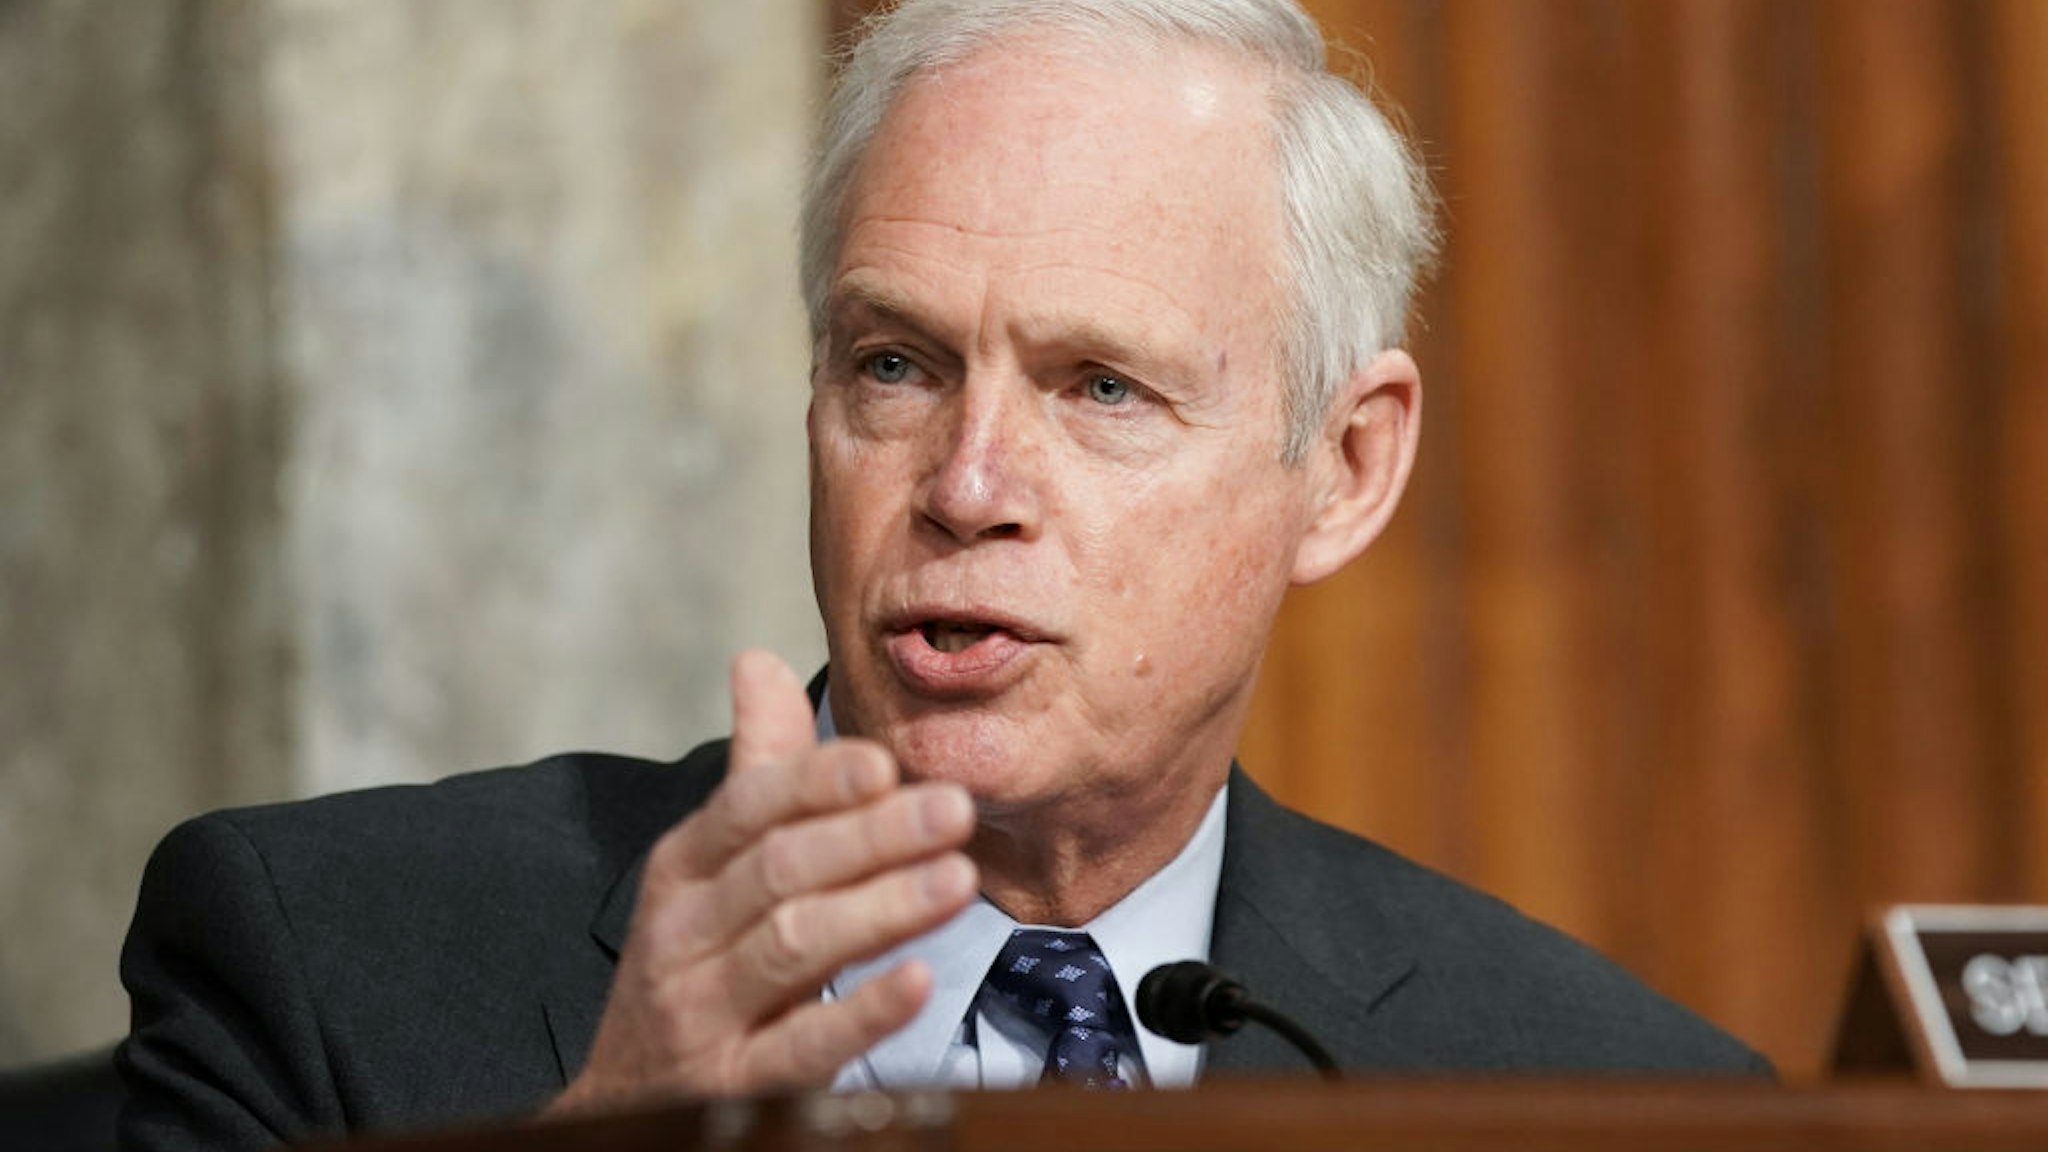 WASHINGTON, DC - MARCH 03: Sen. Ron Johnson (R-WI) asks questions during a Senate Homeland Security and Governmental Affairs &amp; Senate Rules and Administration joint hearing to discuss the January 6th attack on the U.S. Capitol on March 3, 2021 in Washington, DC. The committee is scheduled to hear testimony about DHS, FBI, National Guard and Department of Defense support and response to the attack on the U.S. Capitol on January 6.